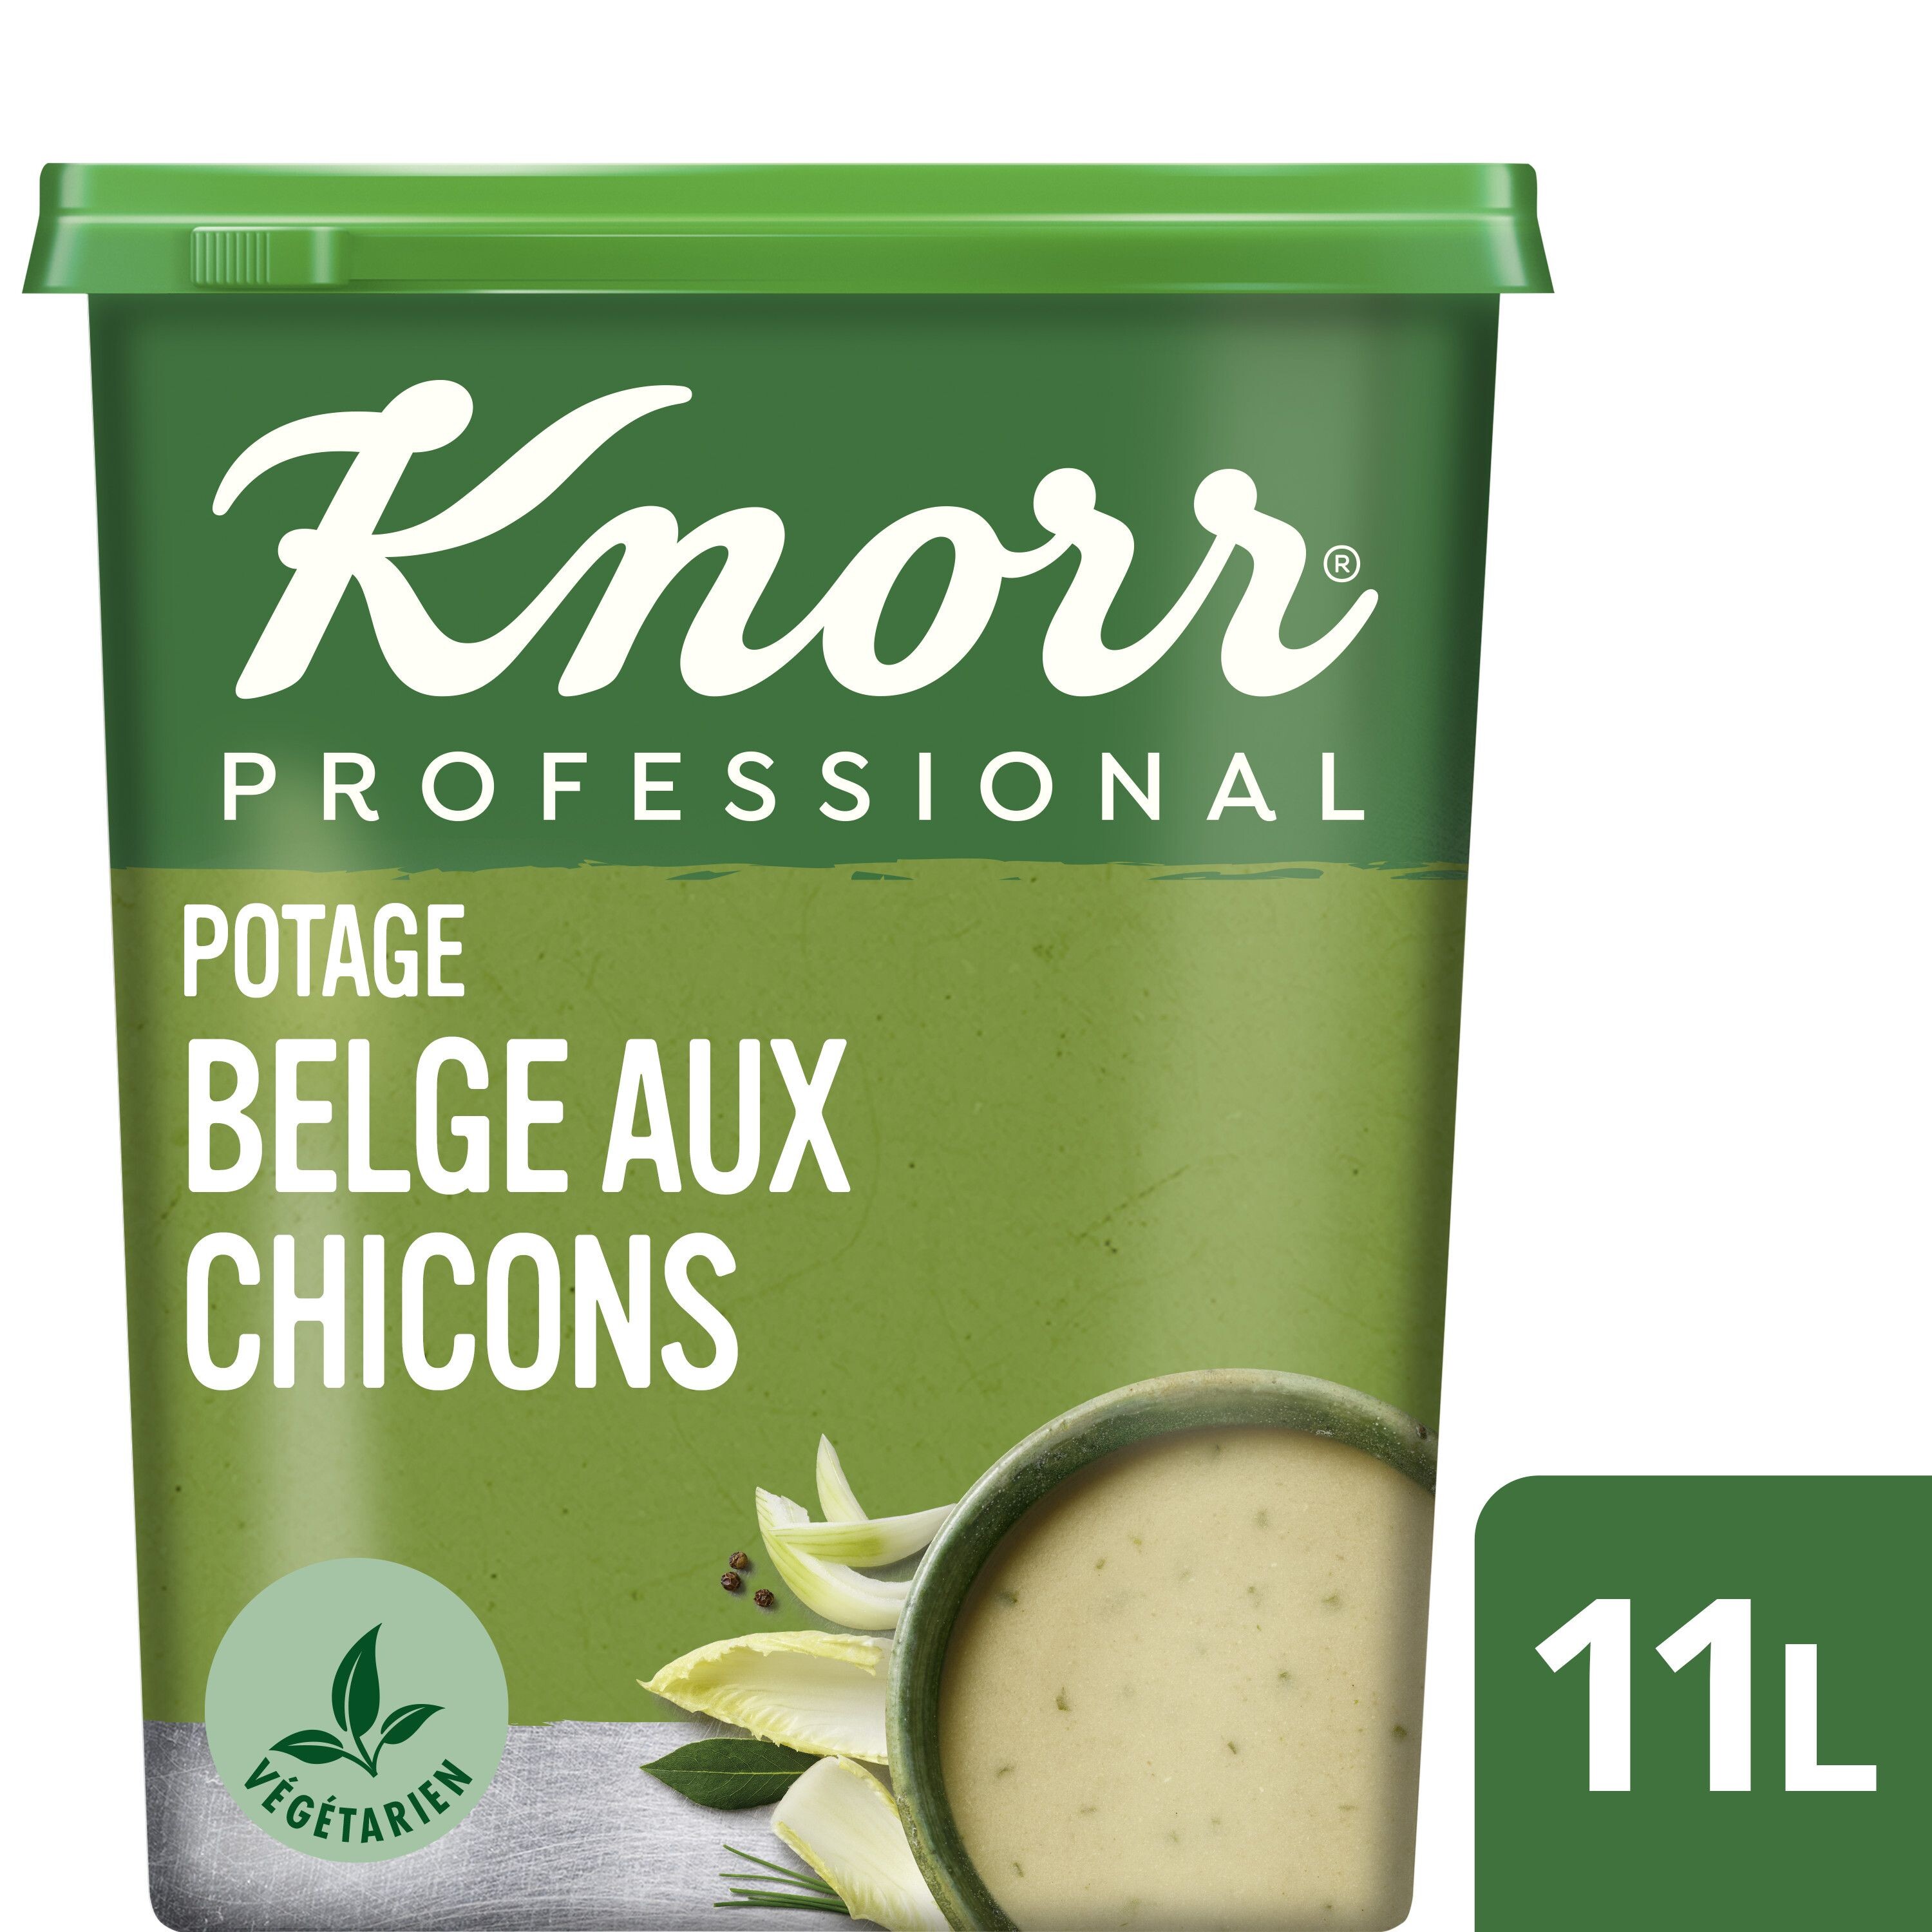 Knorr soup Belgian chicory 1kg Professional